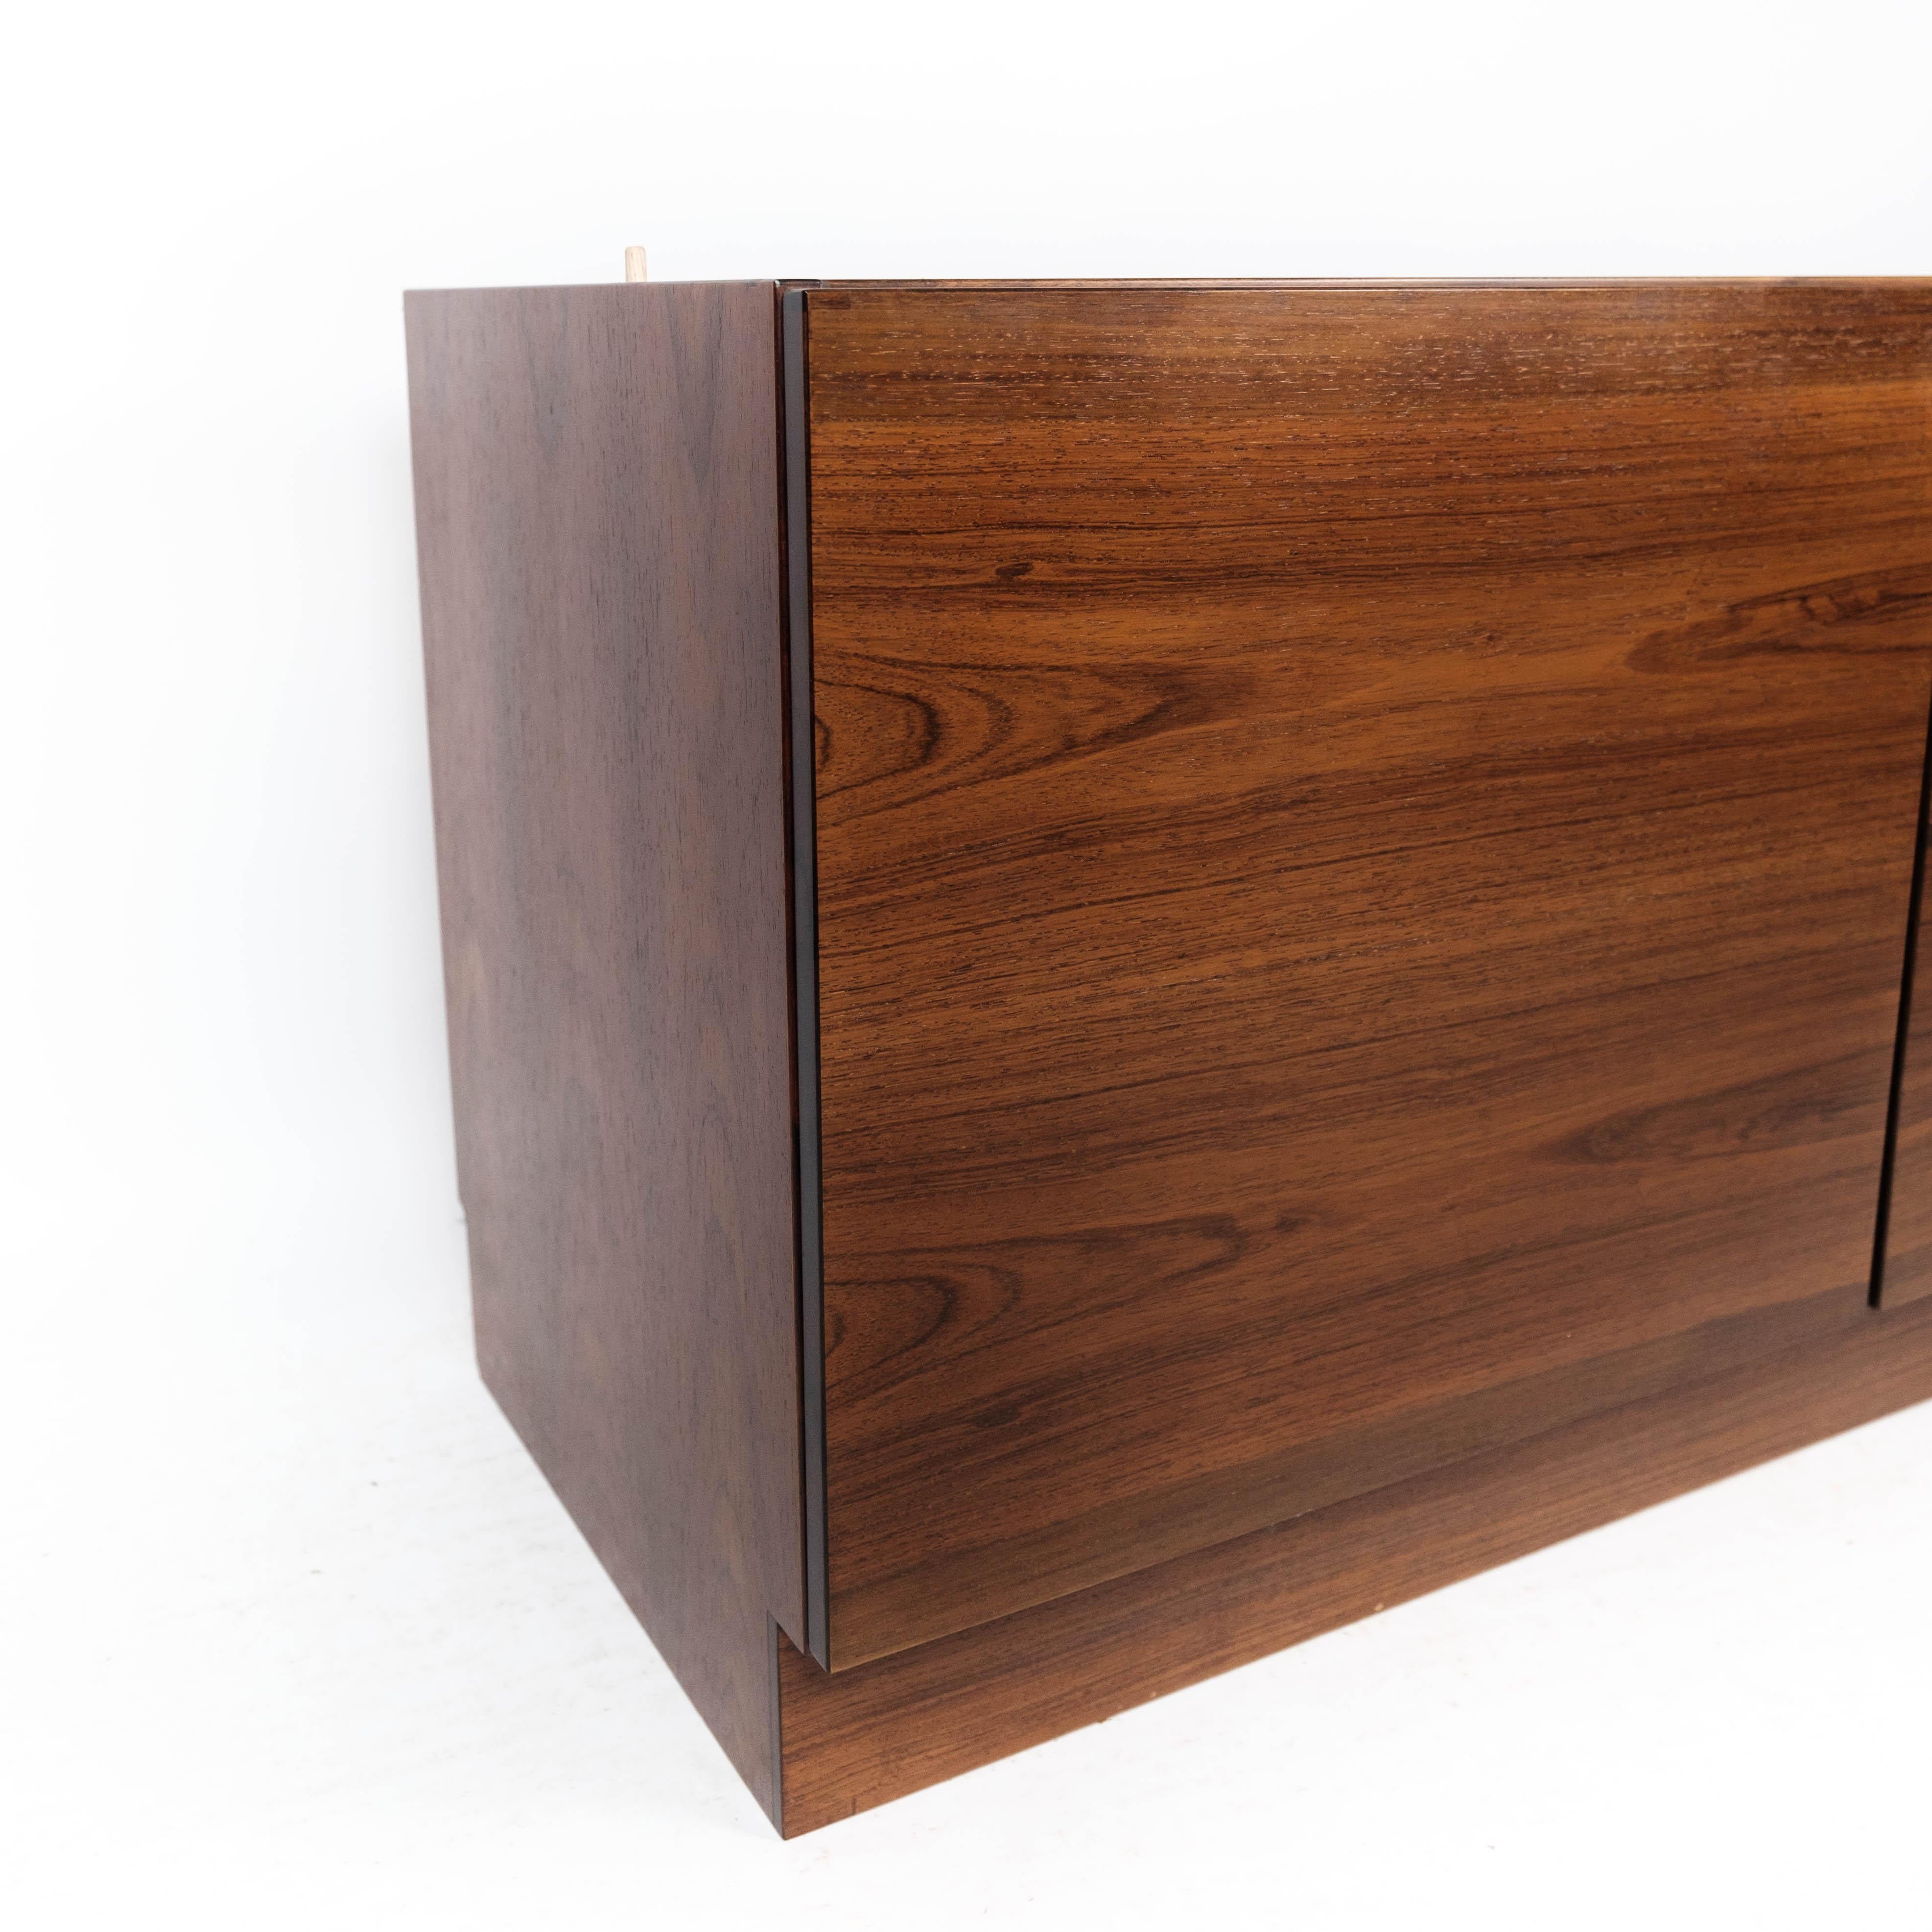 Scandinavian Modern Low Chest of Drawers in Rosewood of Danish Design from the 1960s